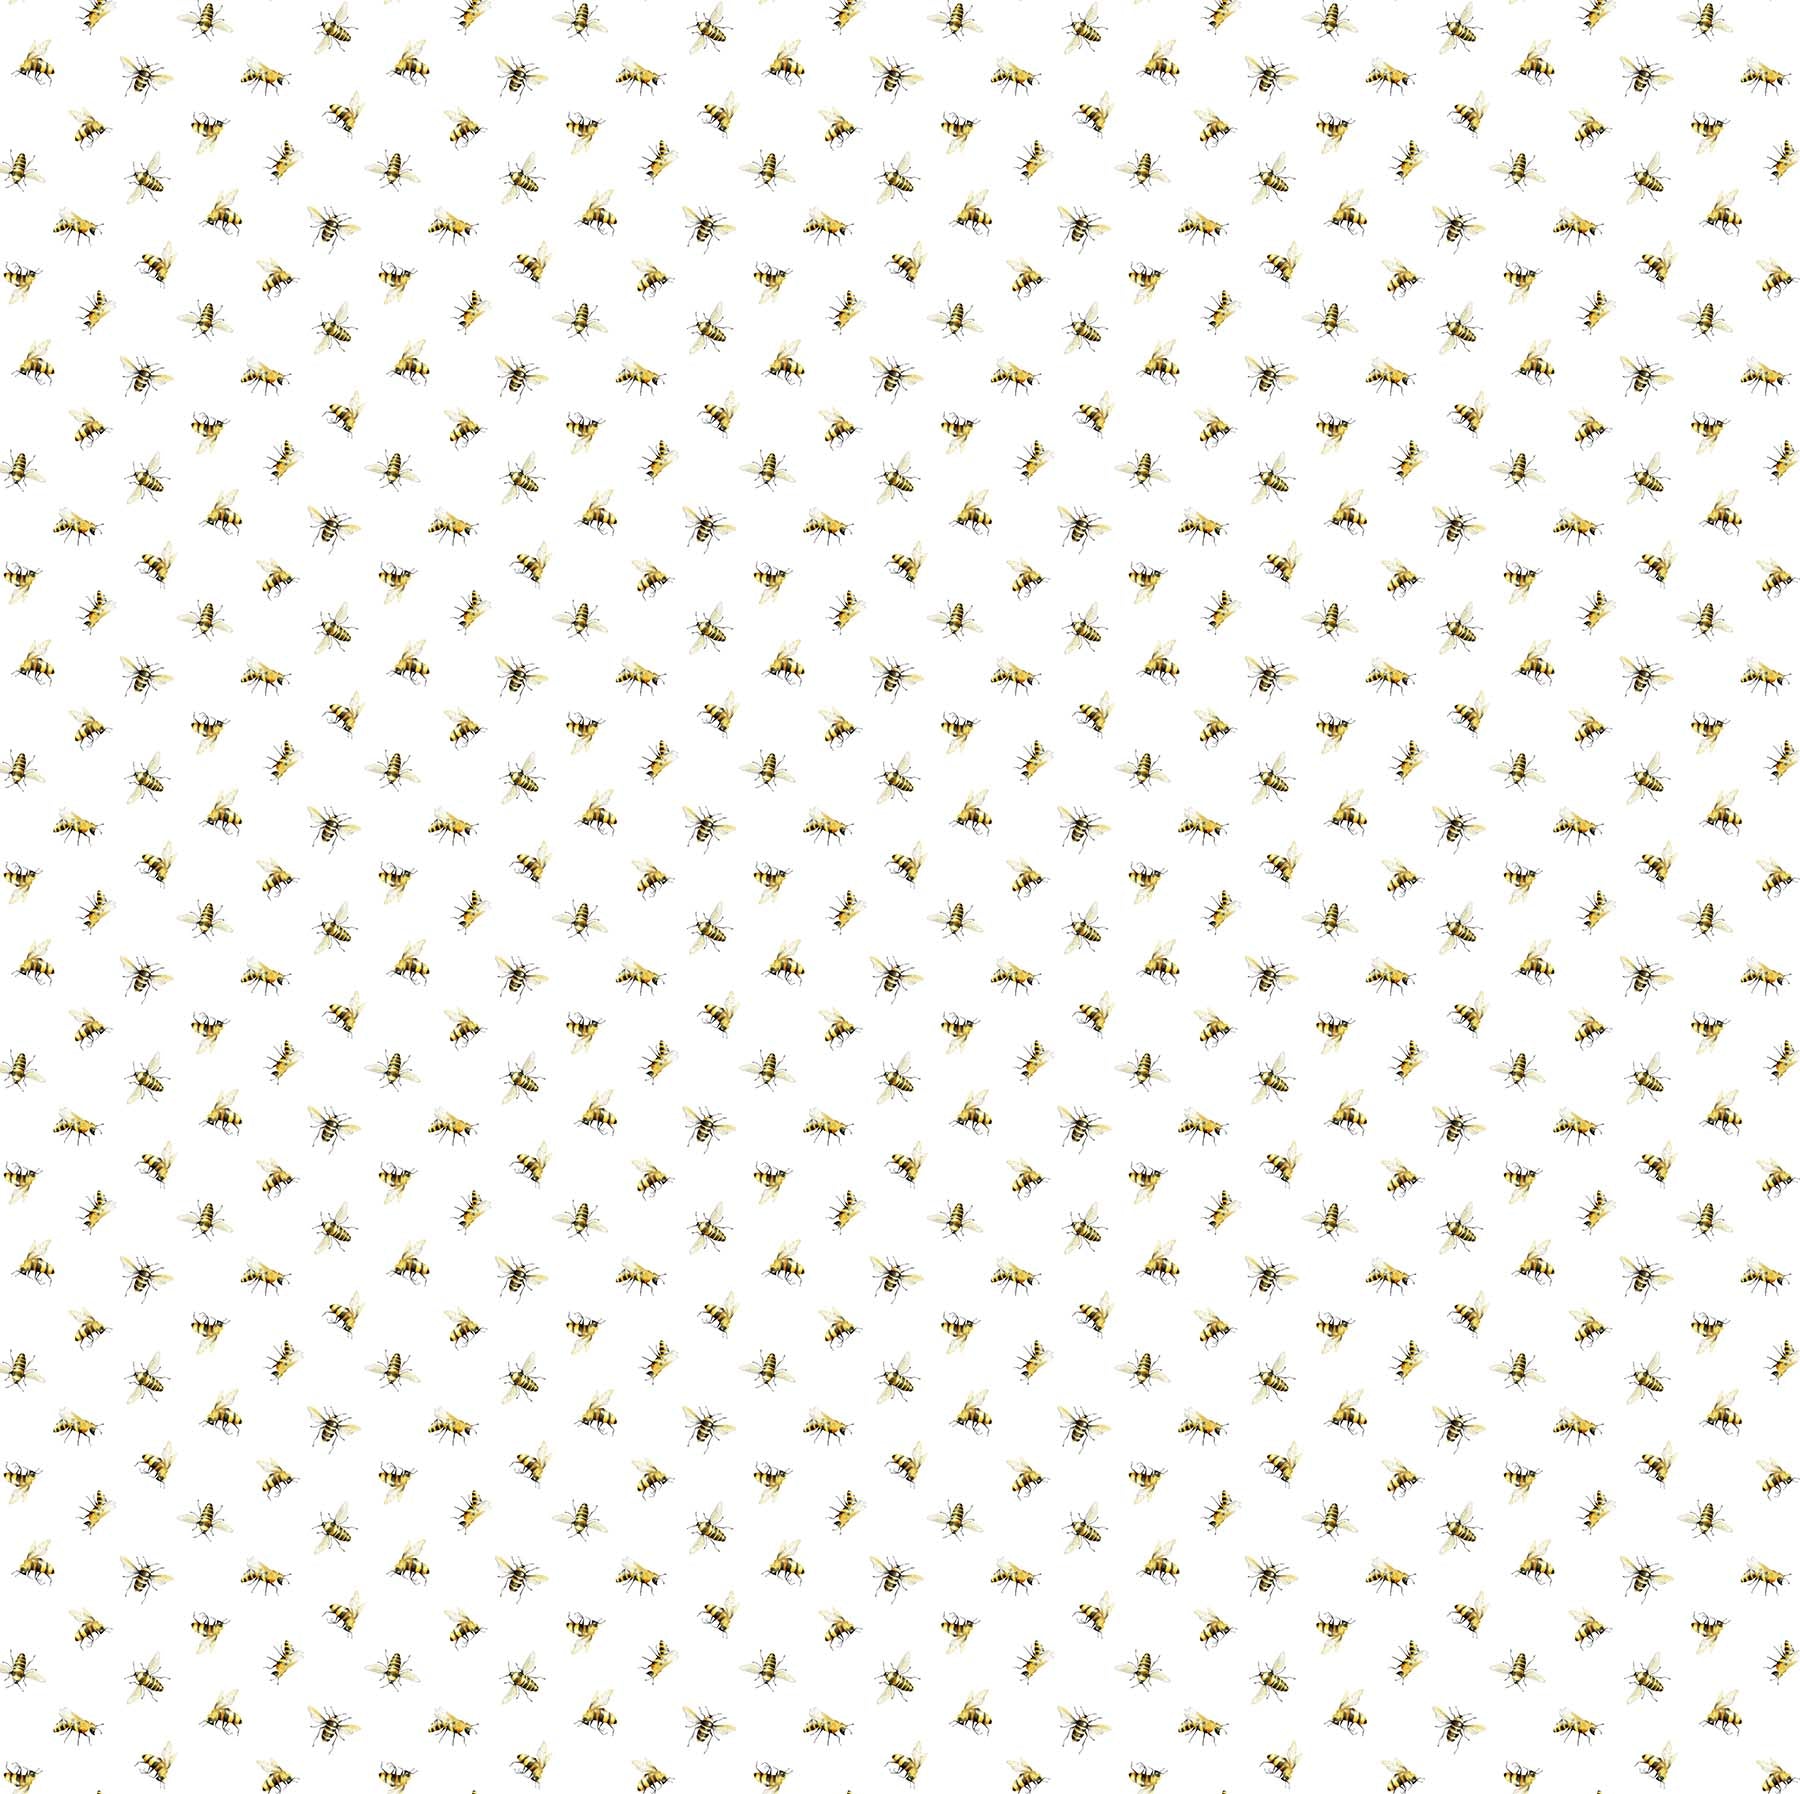 Fabric, Scented Garden, White Multi Tossed Bees 23973 10